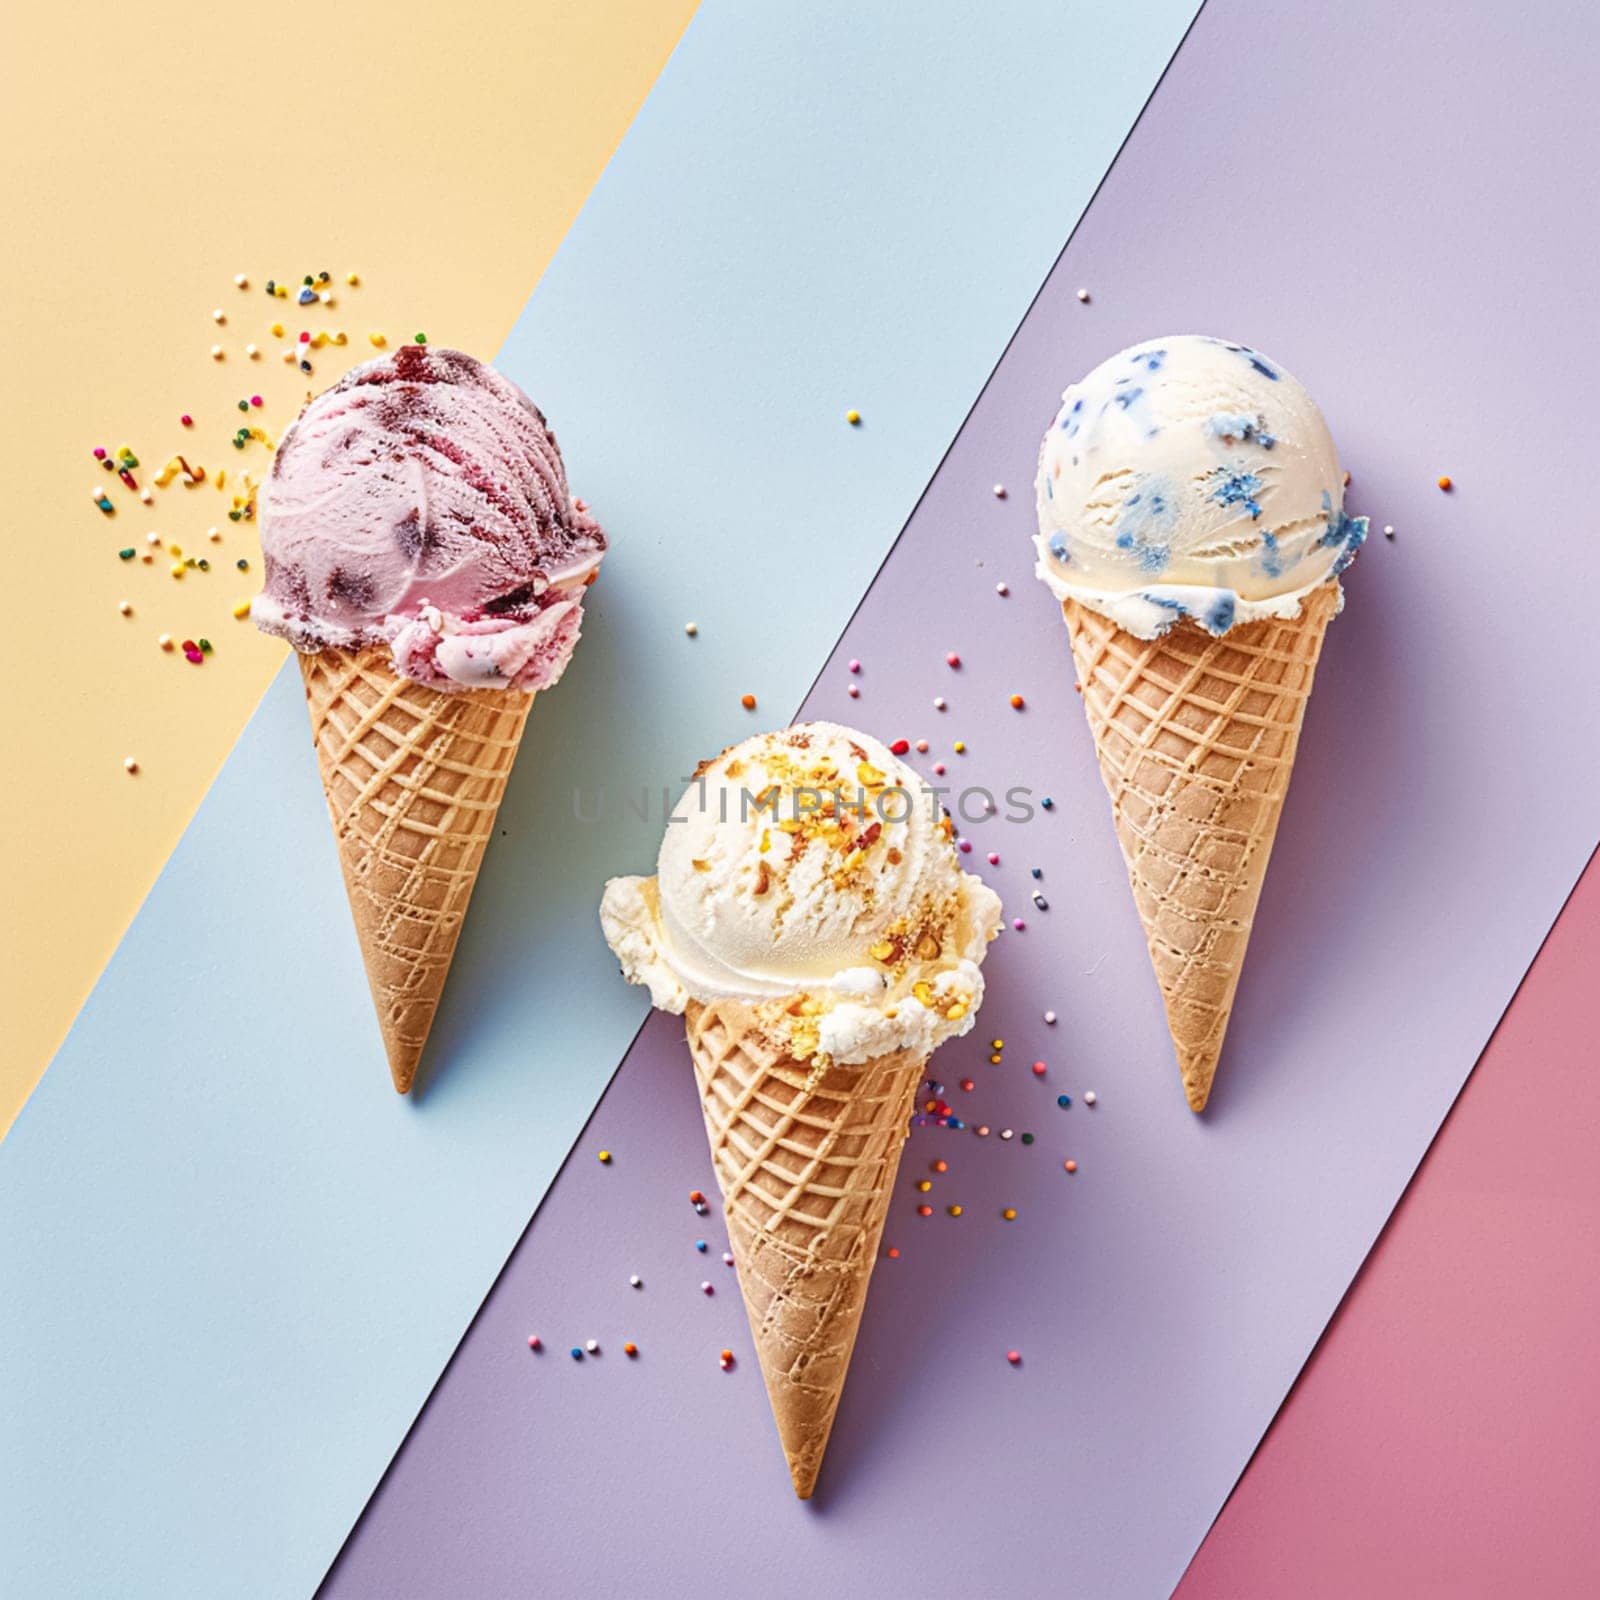 Scoops of ice cream in a waffle cones on a colorful background